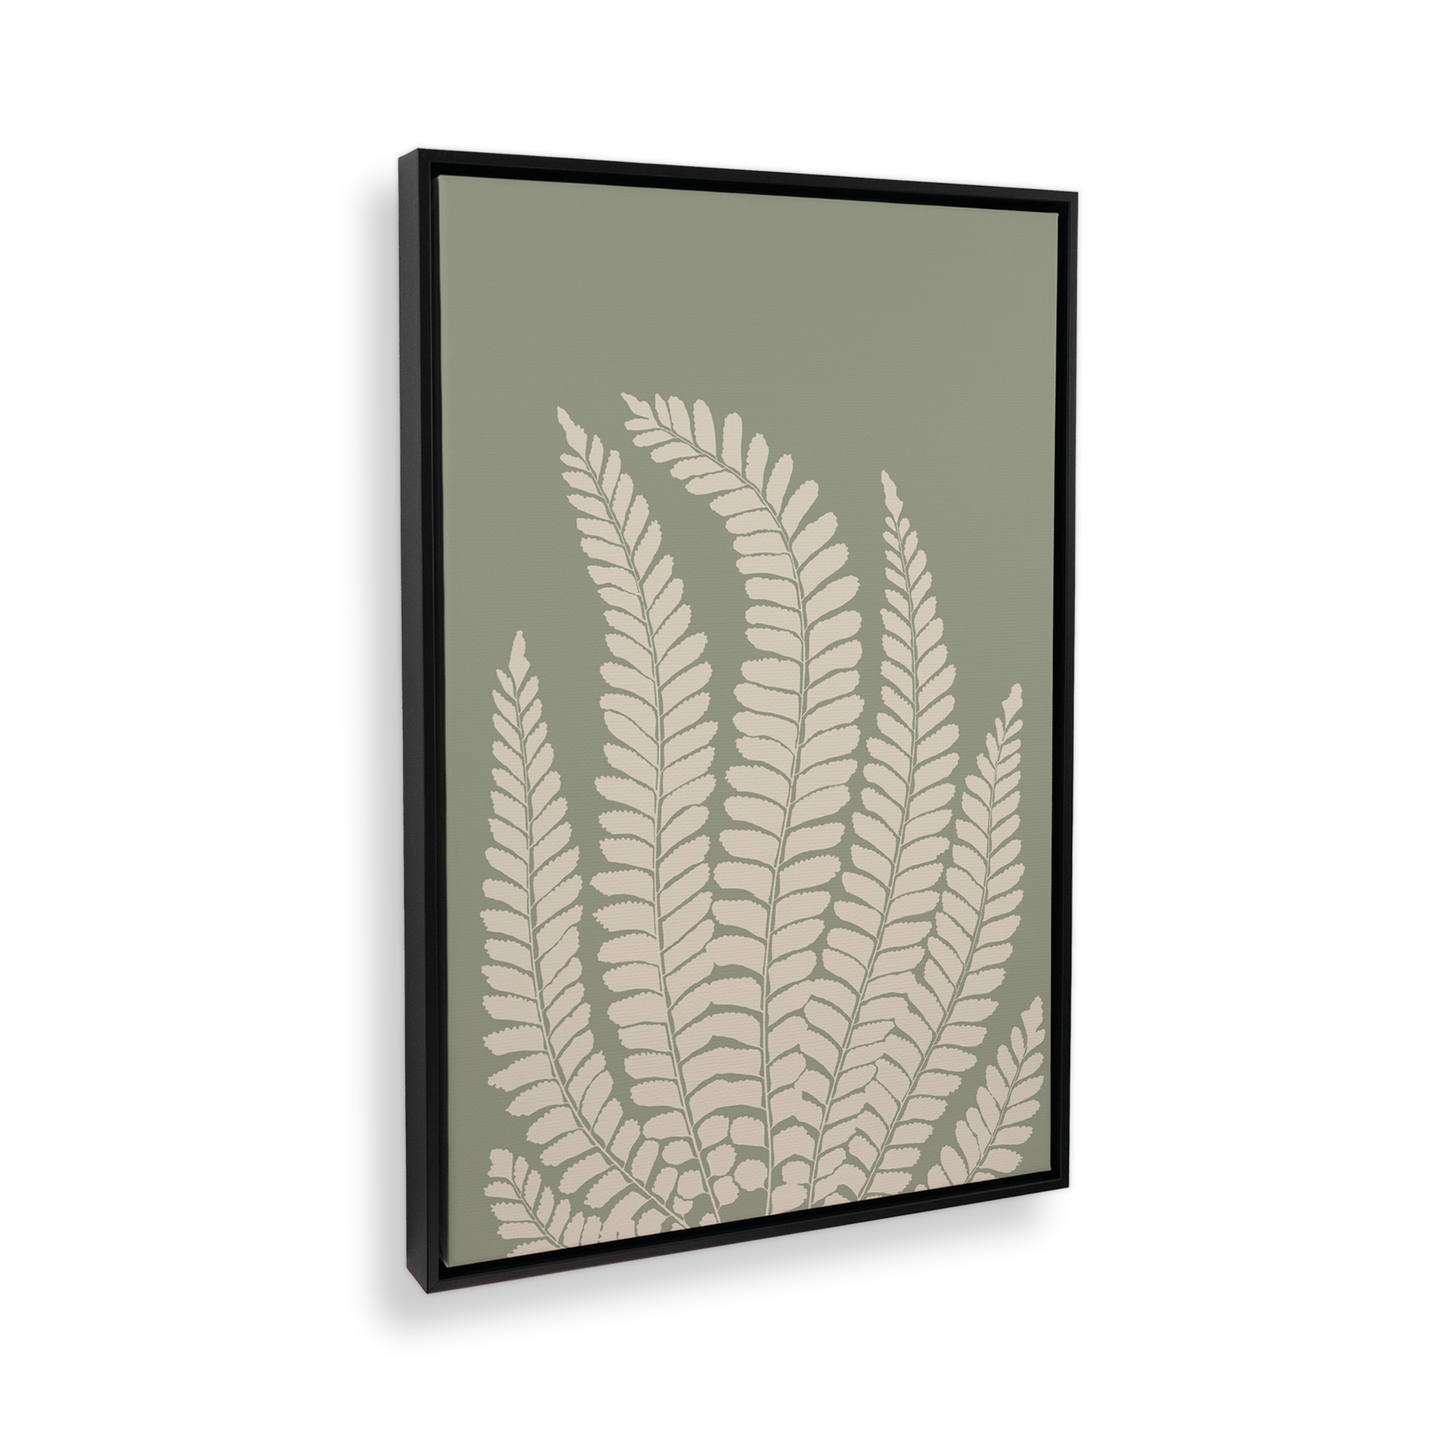 [color:Satin Black], Picture of art in a black frame at angle